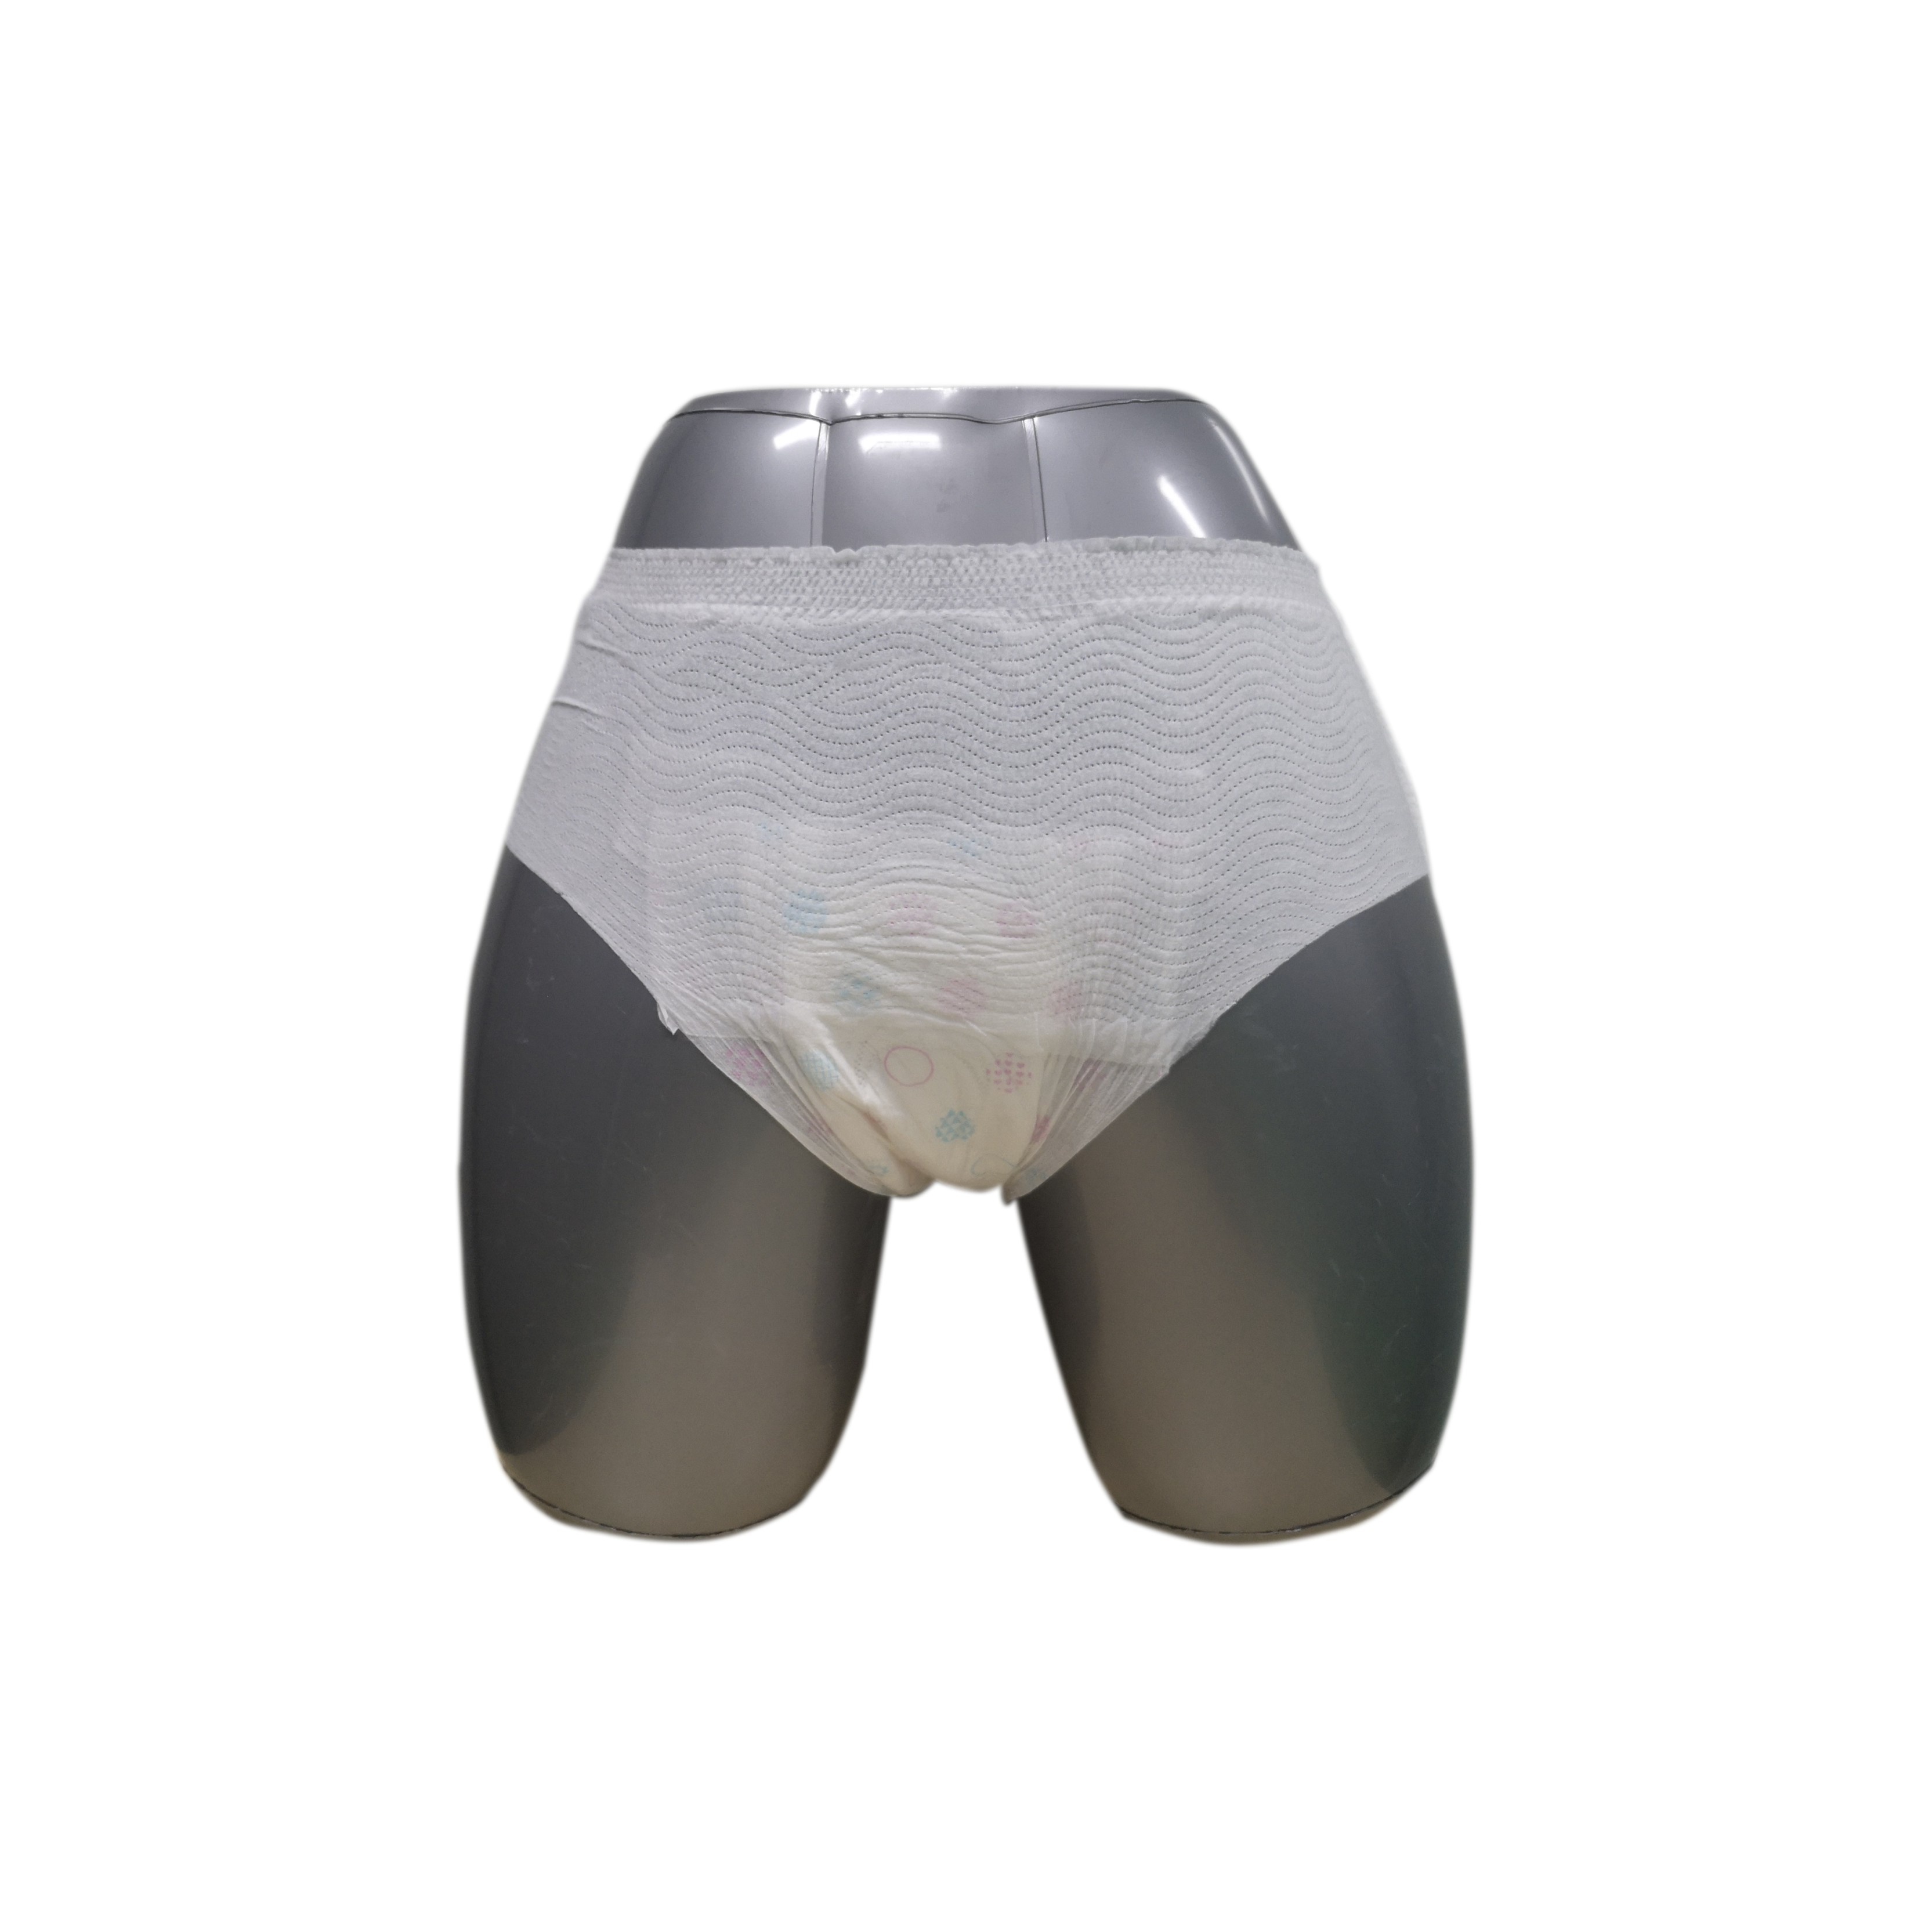 Dry surface lady menstrual periodic pants